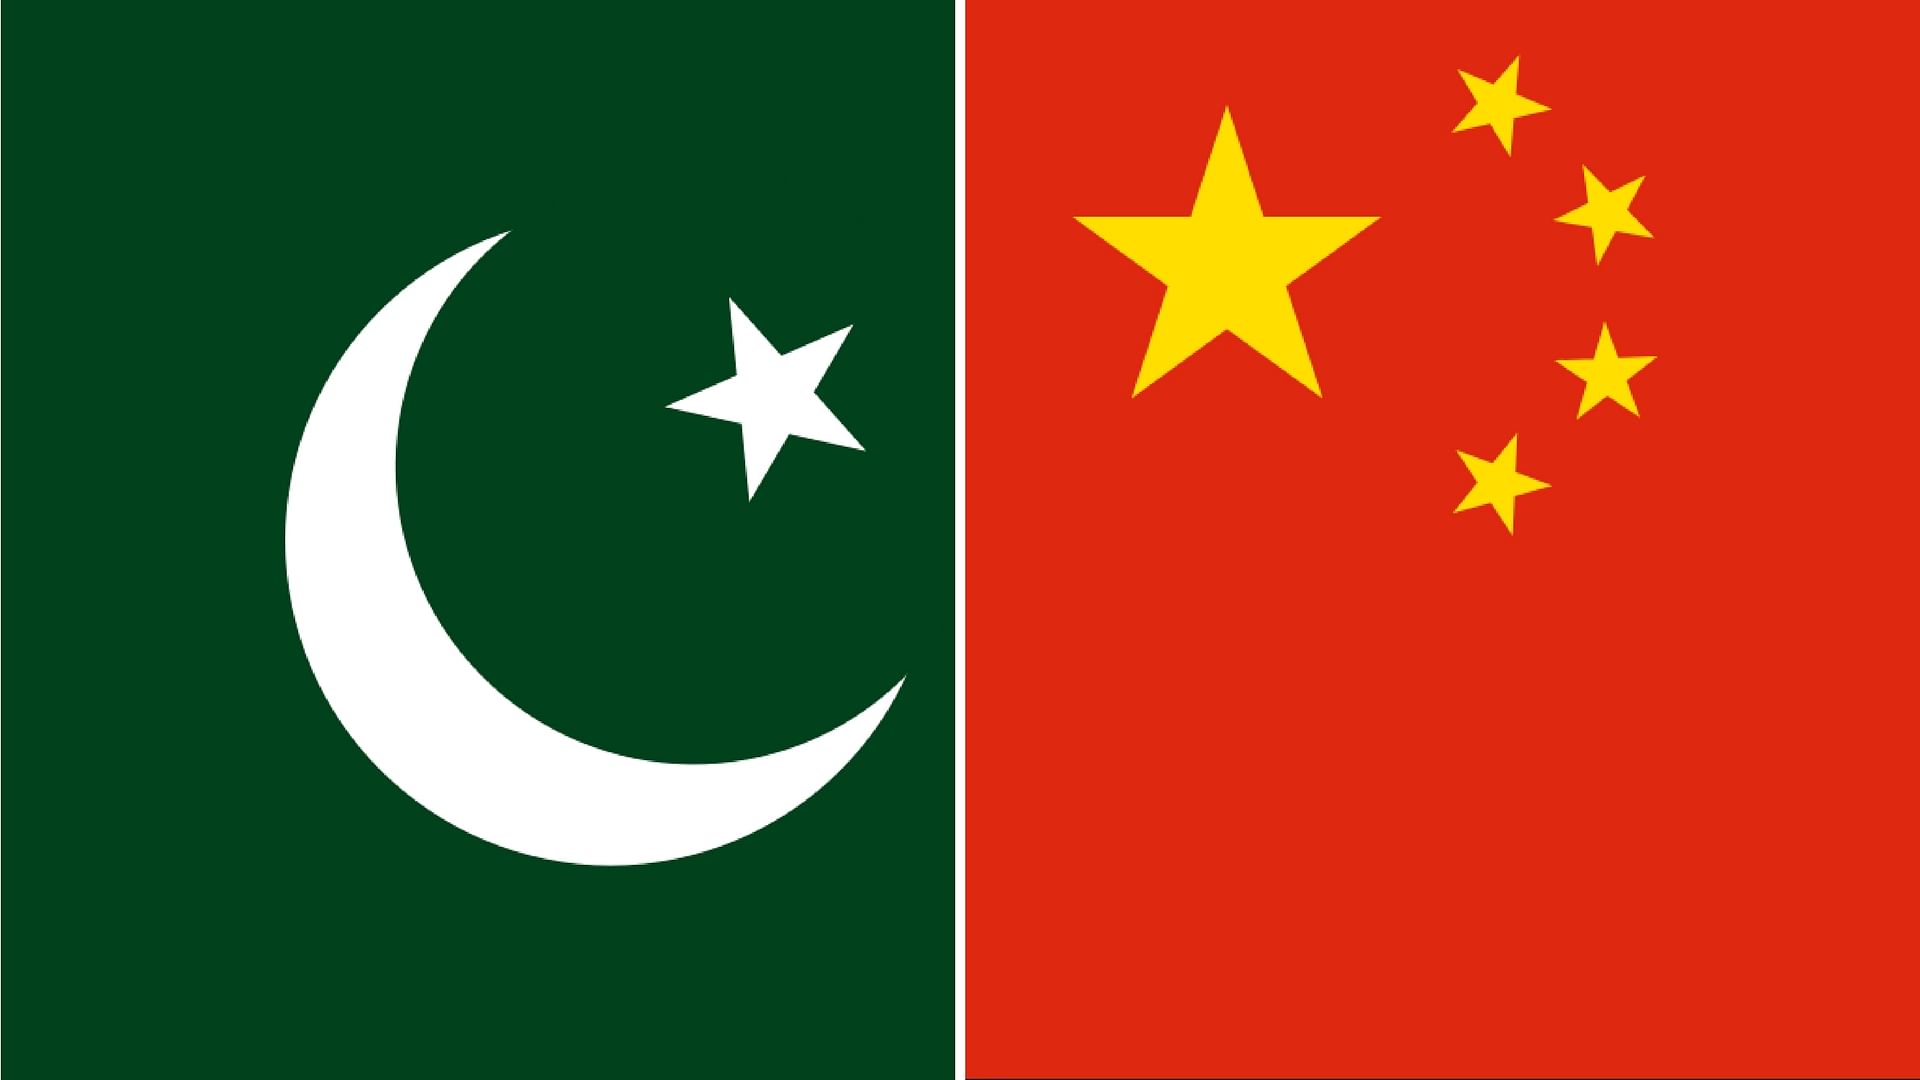 Pakistan and China to Discuss CPEC Projects during PM Imran Khan’s Visit to Beijing.